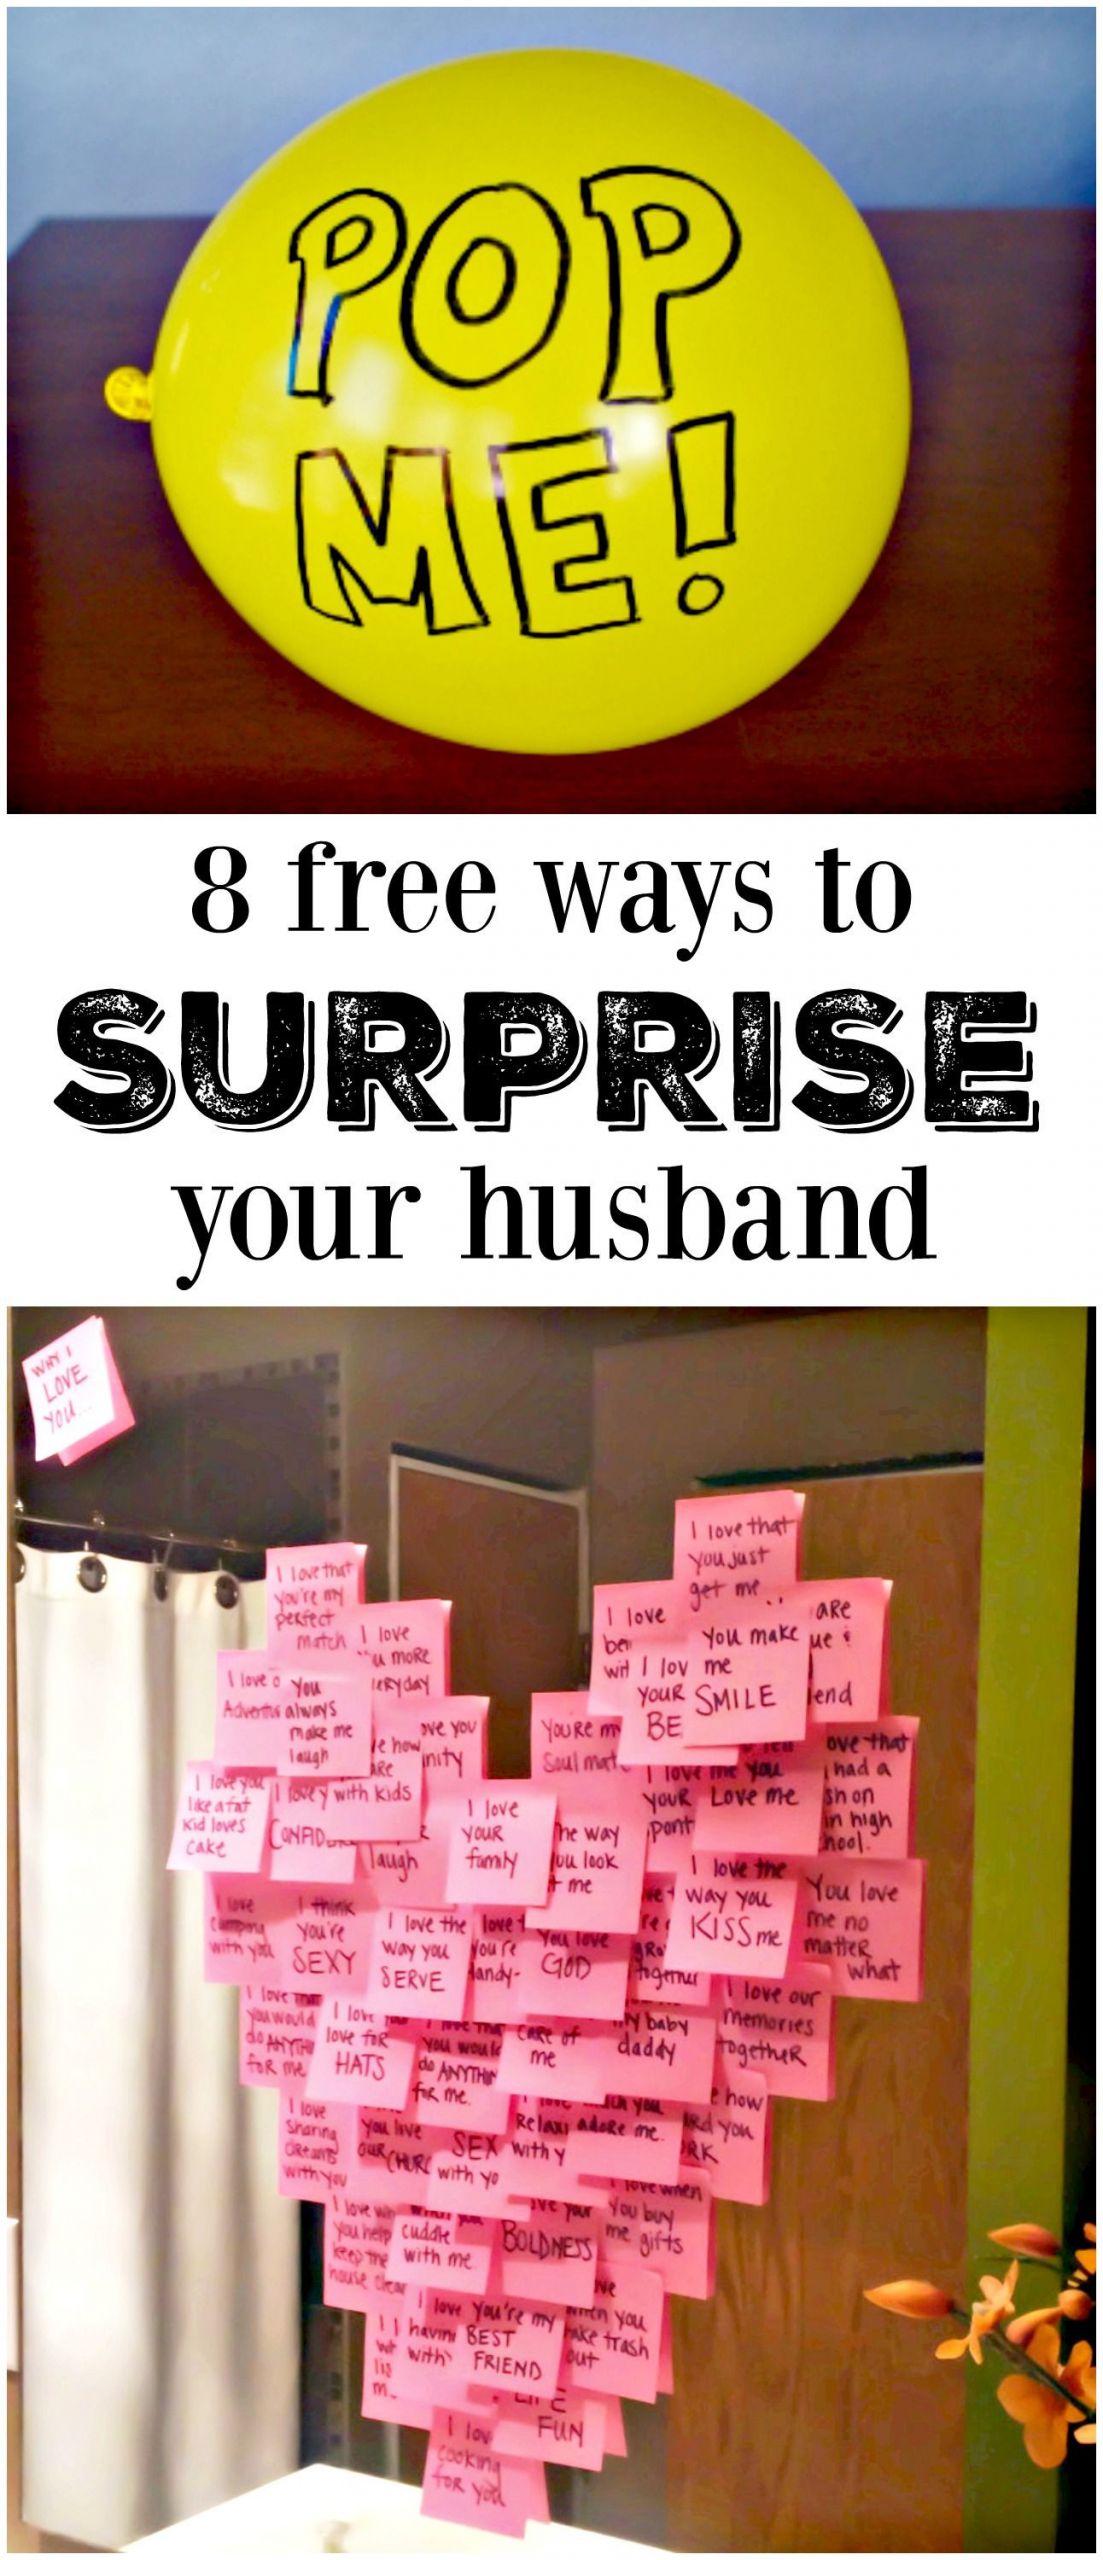 Free Gift Ideas For Boyfriend
 8 Meaningful Ways to Make His Day DIY Ideas